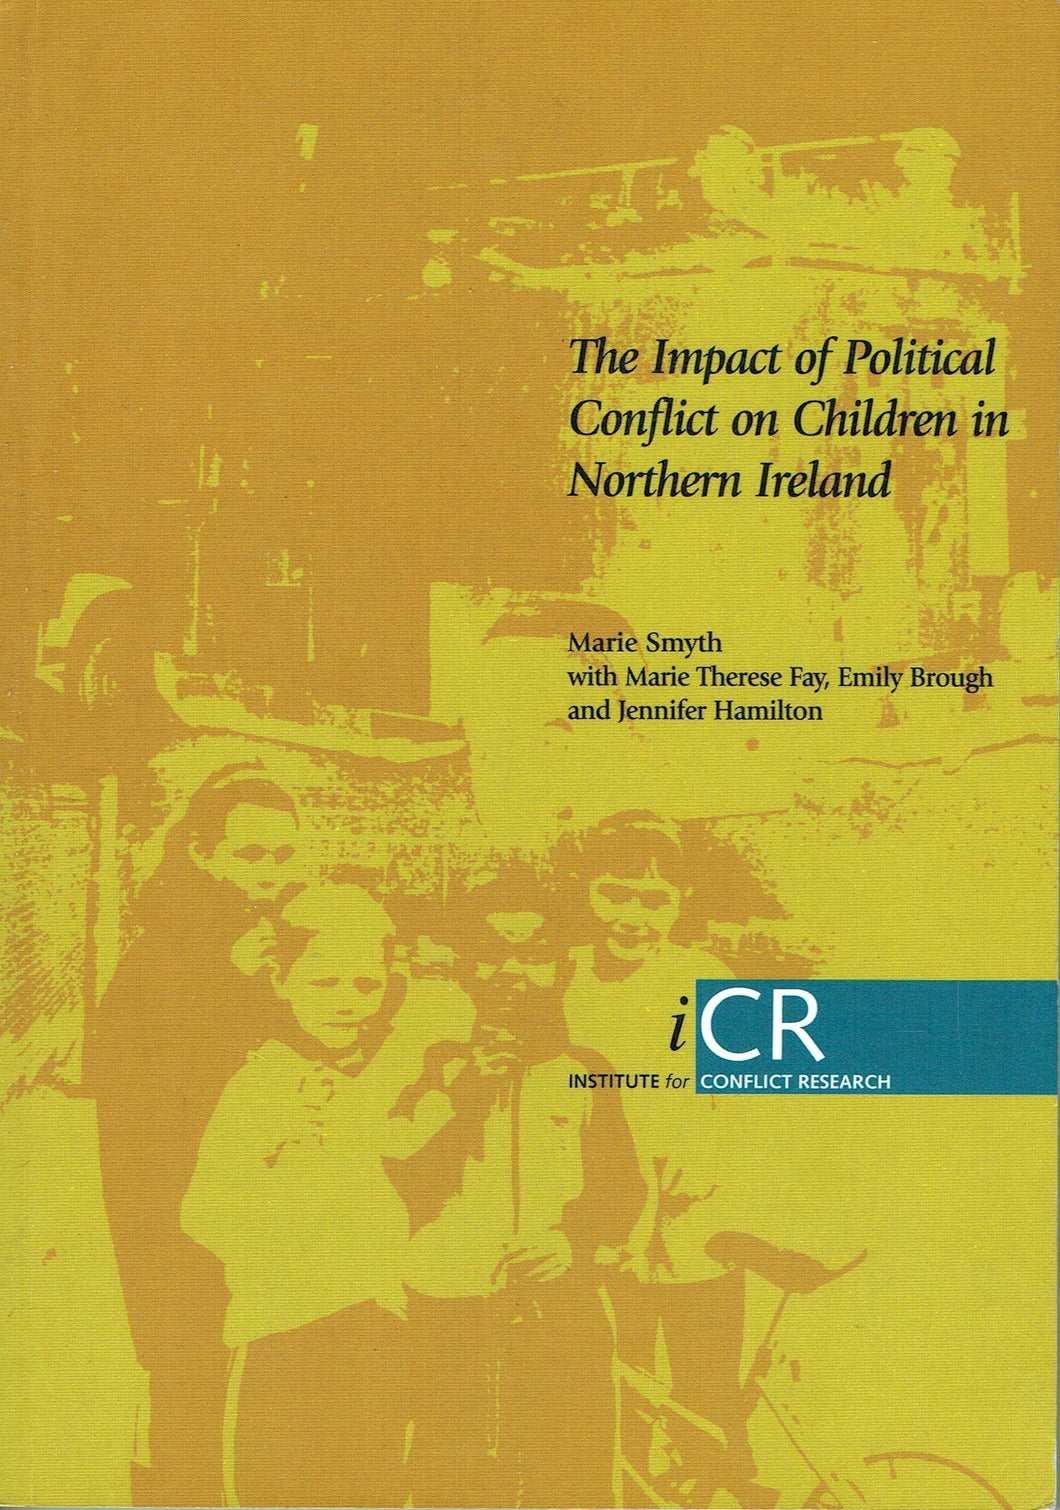 The Impact of Political Conflict on Children in Northern Ireland